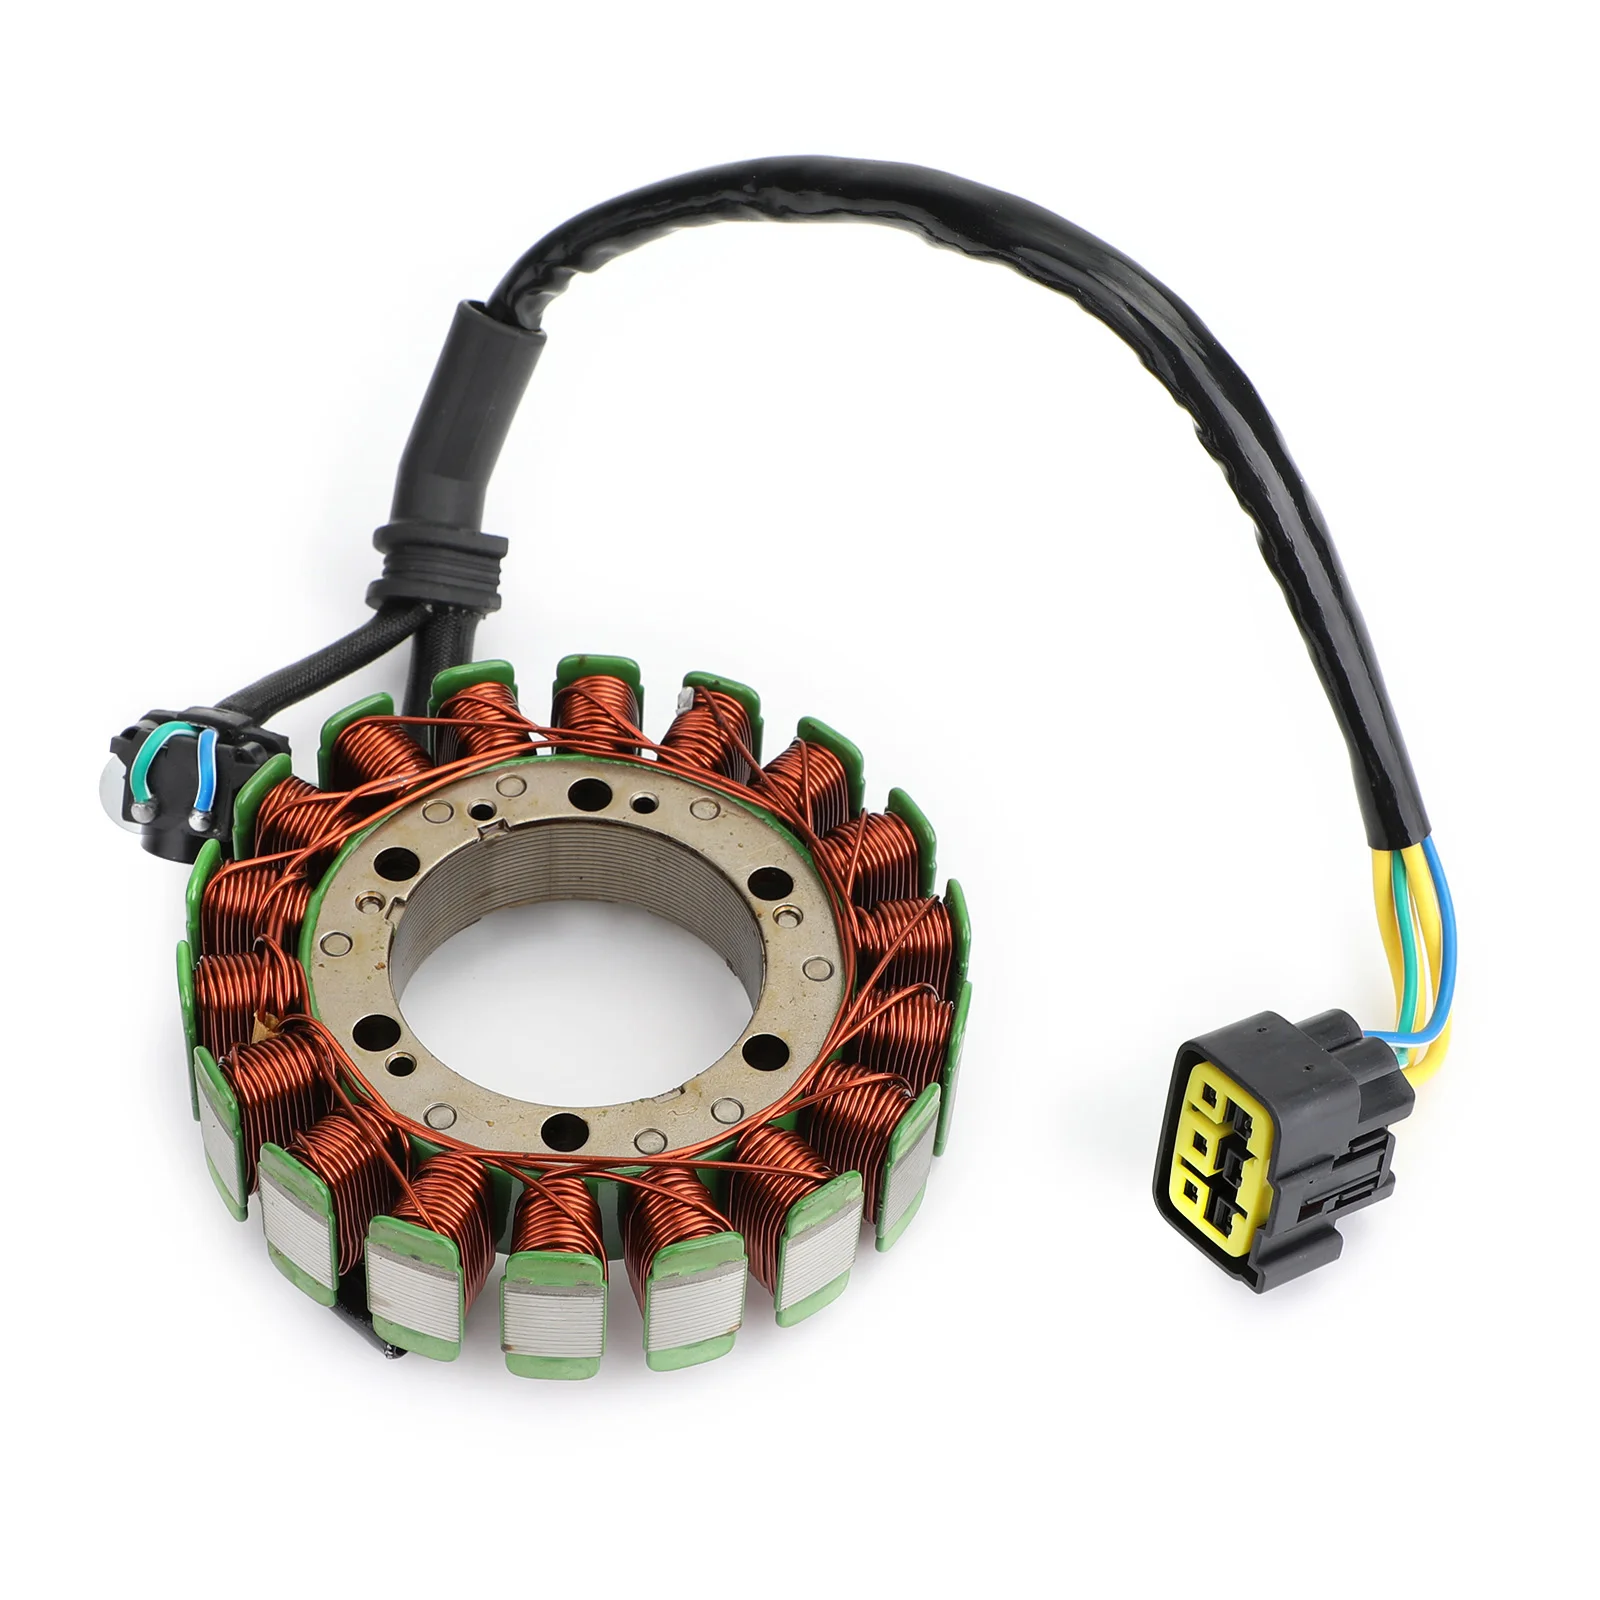 

Areyourshop Magneto Generator Engine Stator Coil Fit for Honda TRX 680 FA Rincon 680 2015-2021 31120-HN8F41 Motorcycle Parts